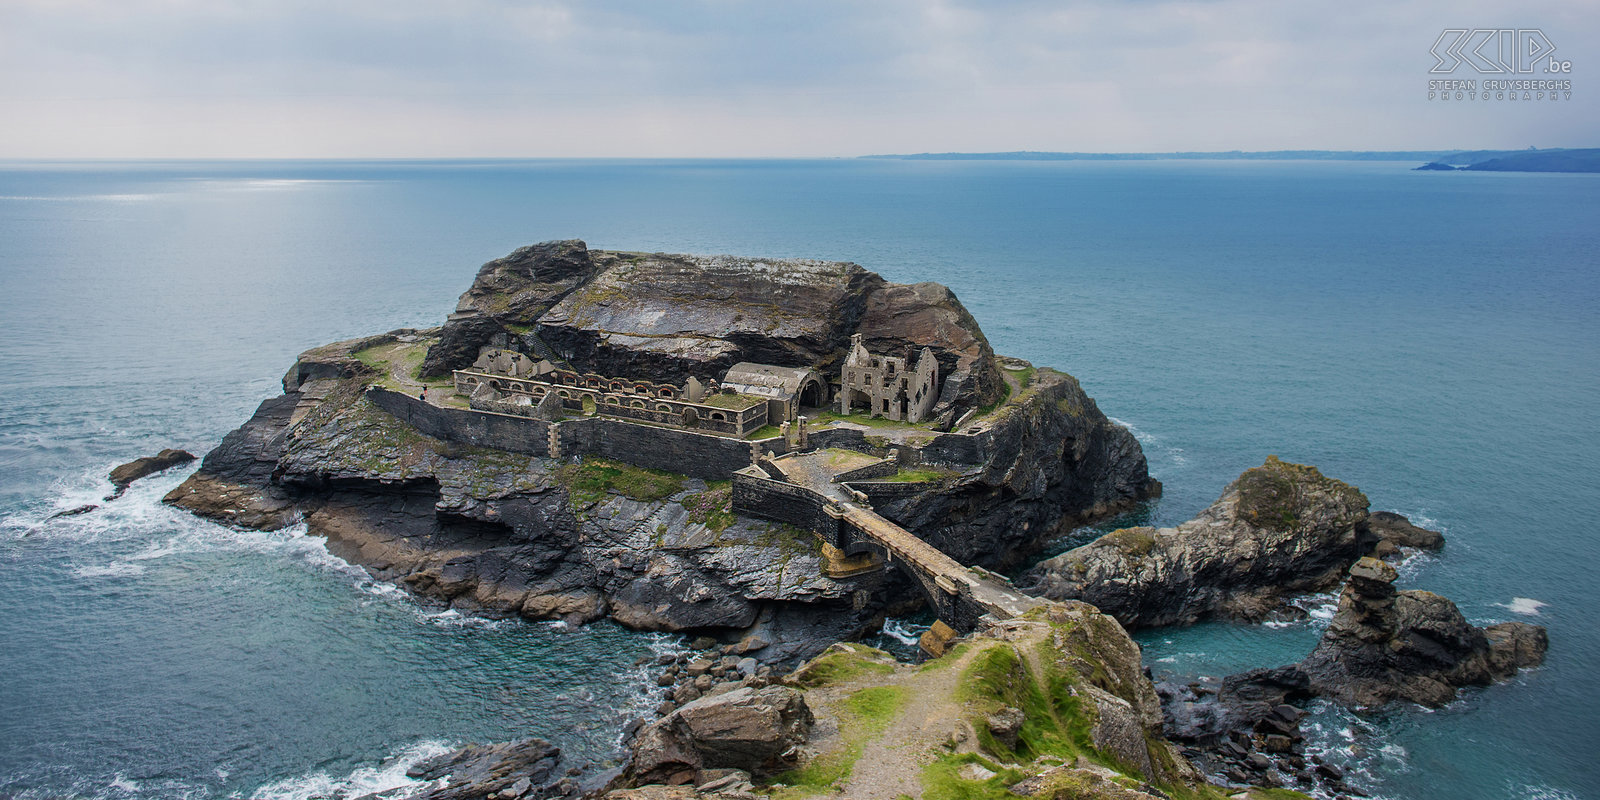 Crozon - Fort des Capucins The Fort des Capuchins is located at the rocky islet near the commune of Roscanvel on the Crozon peninsula in Brittany. Its name 'Capuchins' because it is shaped like a praying monk. The fort was built in 1848.  Stefan Cruysberghs